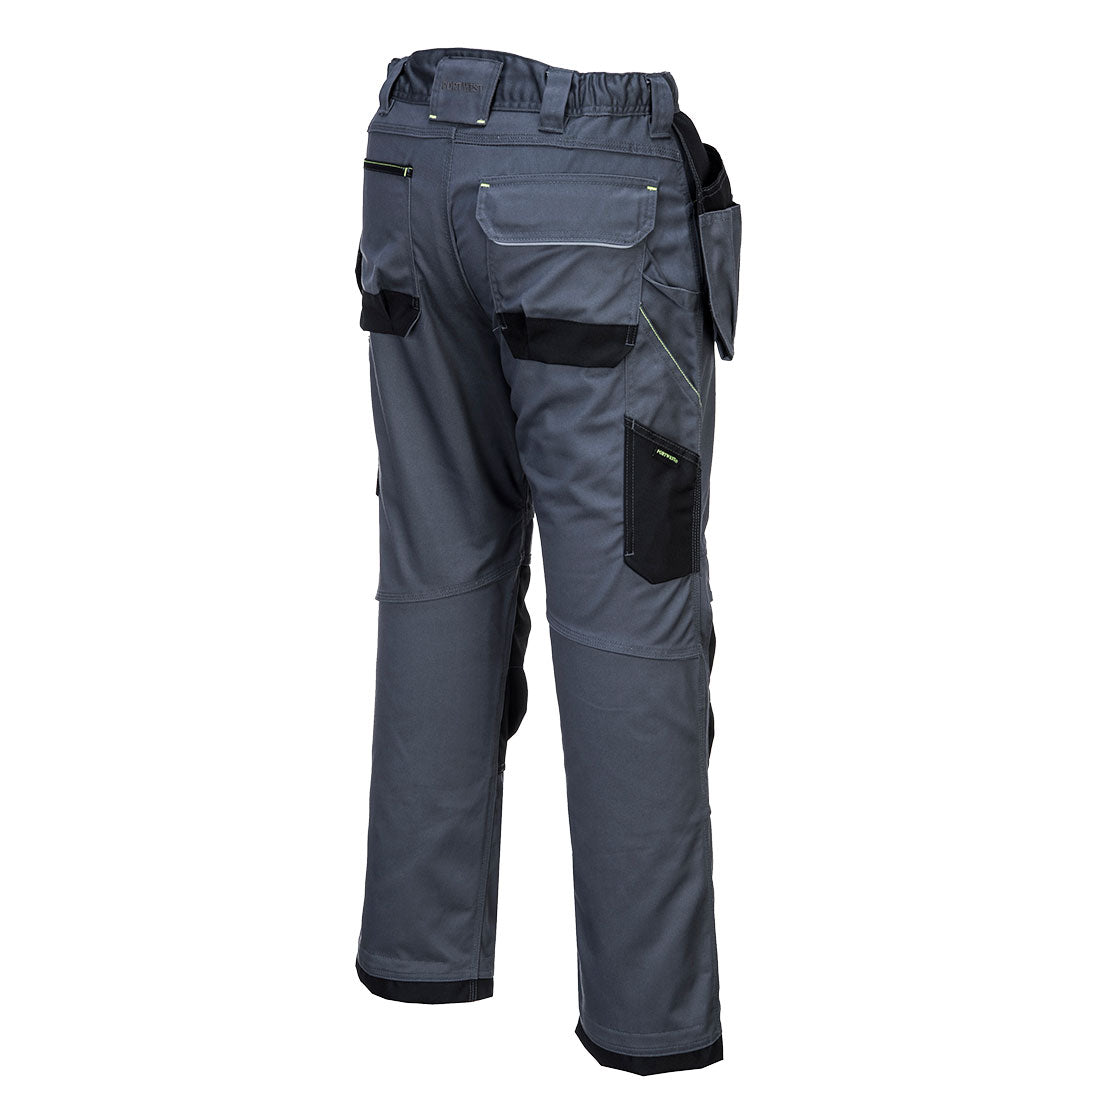 Portwest T602 PW3 Holster Work Trousers 1#colour_zoom-grey-black 2#colour_zoom-grey-black 3#colour_zoom-grey-black